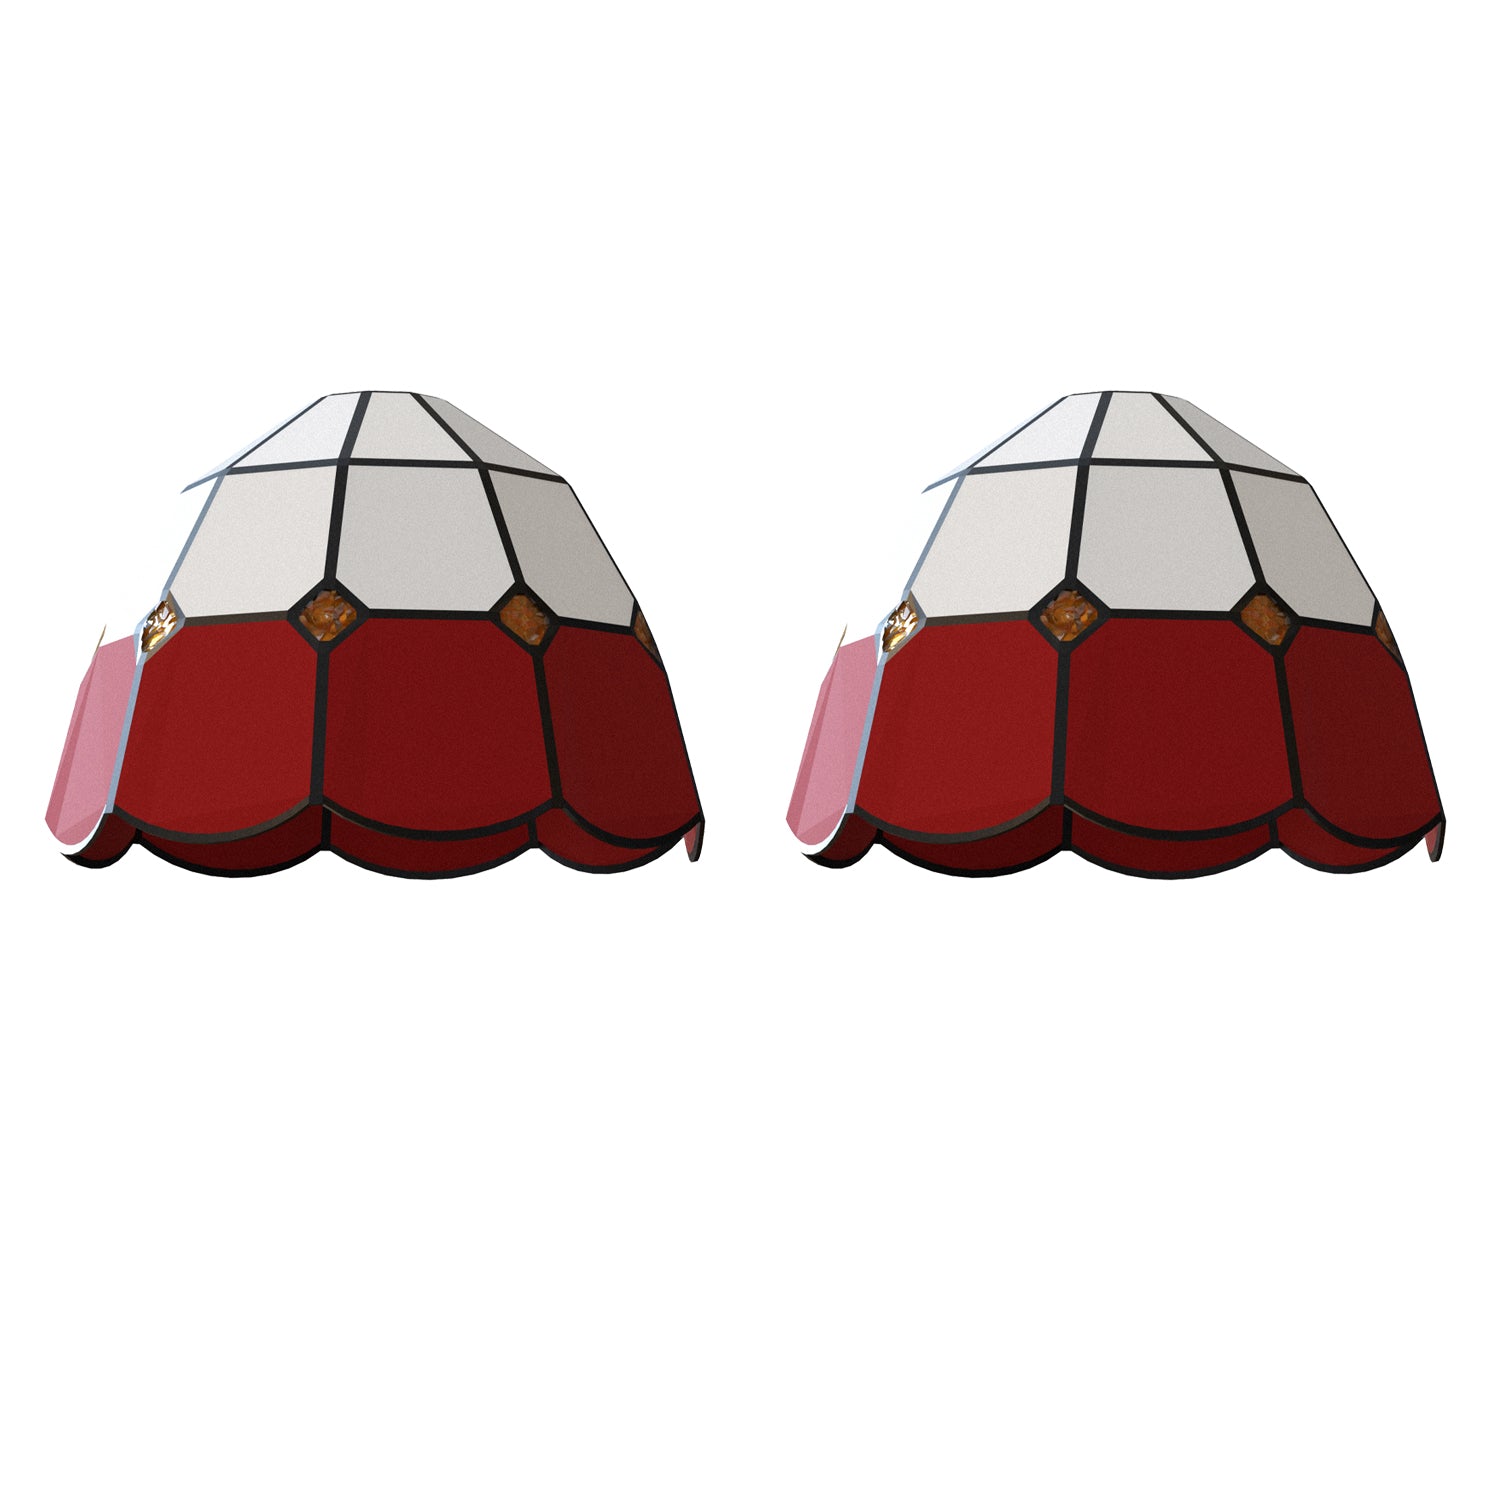 Vintage Tiffany Style Stained Glass Lamp Shade Fixtures - 2 Pack